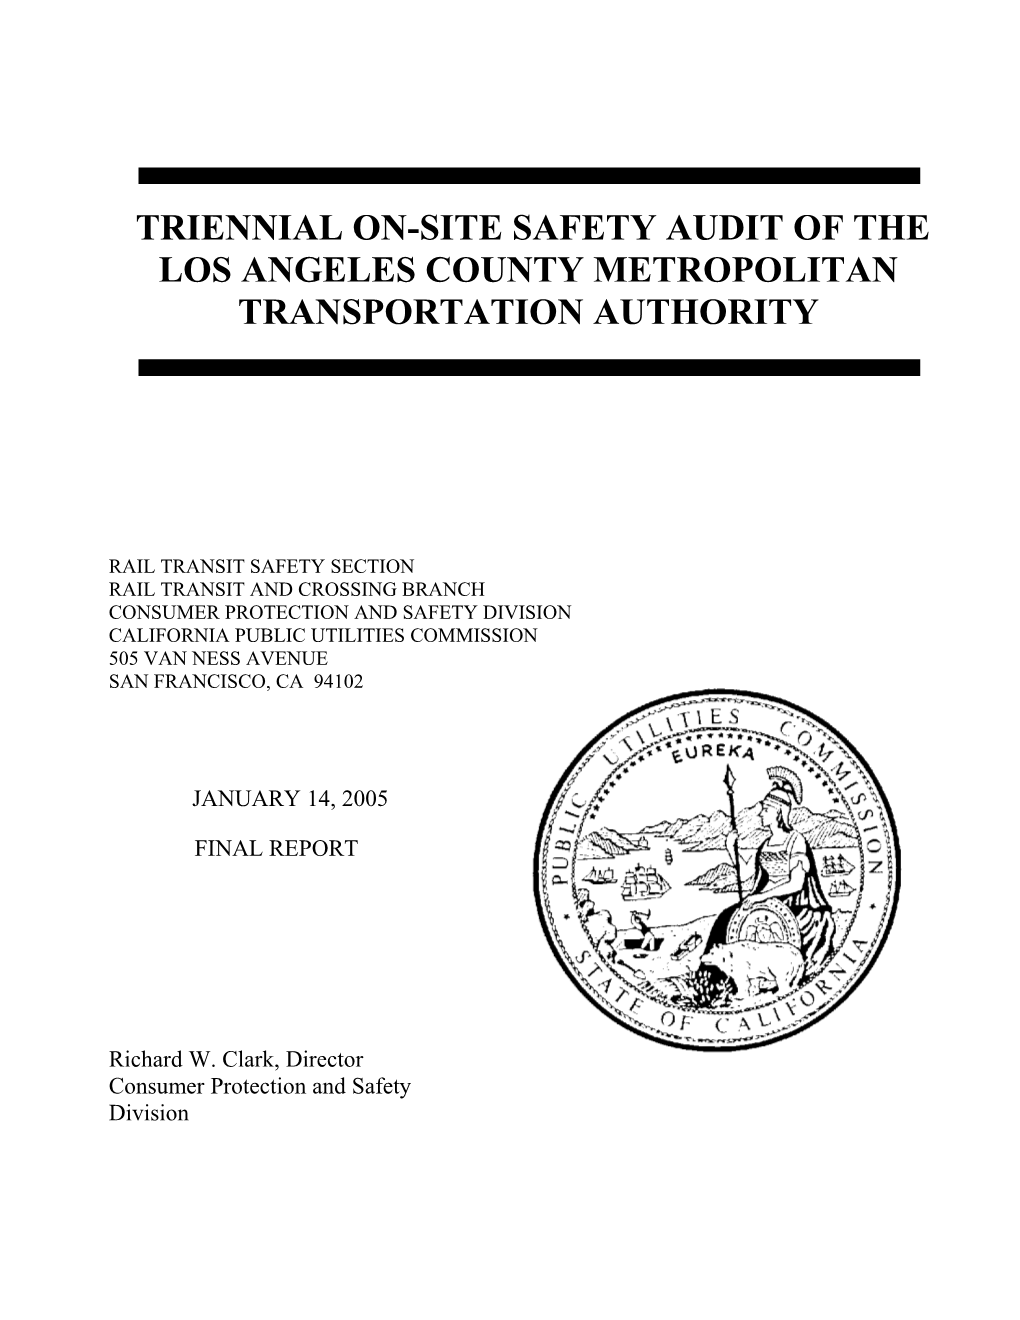 Triennial On-Site Safety Audit of the Los Angeles County Metropolitan Transportation Authority